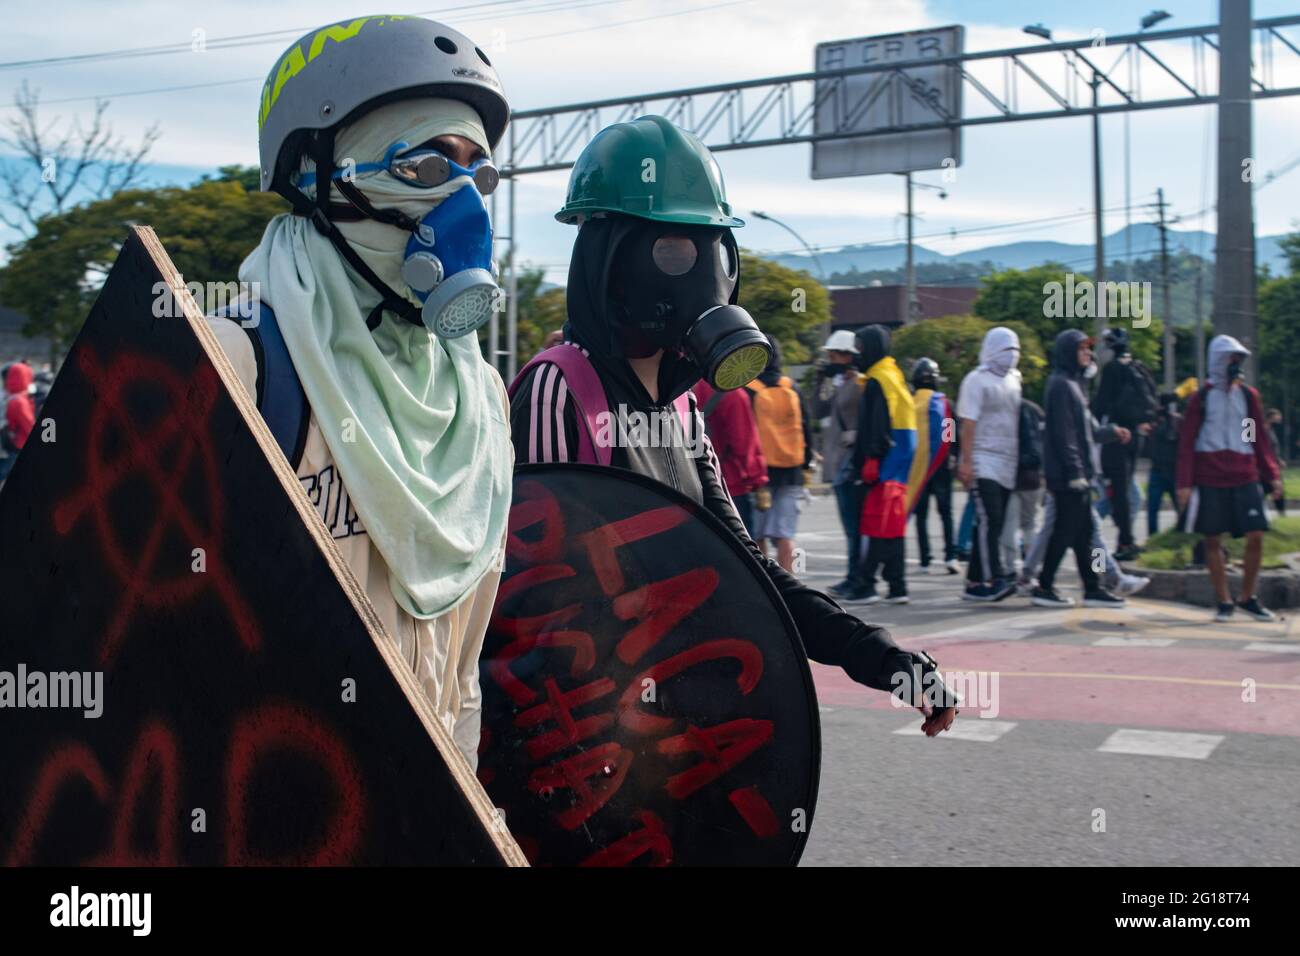 Members of the front line protect their identities with gas masks as clashes between demonstrators and Colombia's riot police (ESMAD) erupt in Medellín, Colombia after several weeks of anti-government protest against President Ivan Duque's tax and health reforms and unrest and abuse of authority cases that leave at least 70 dead according to NGOs on June 4, 2021. Stock Photo